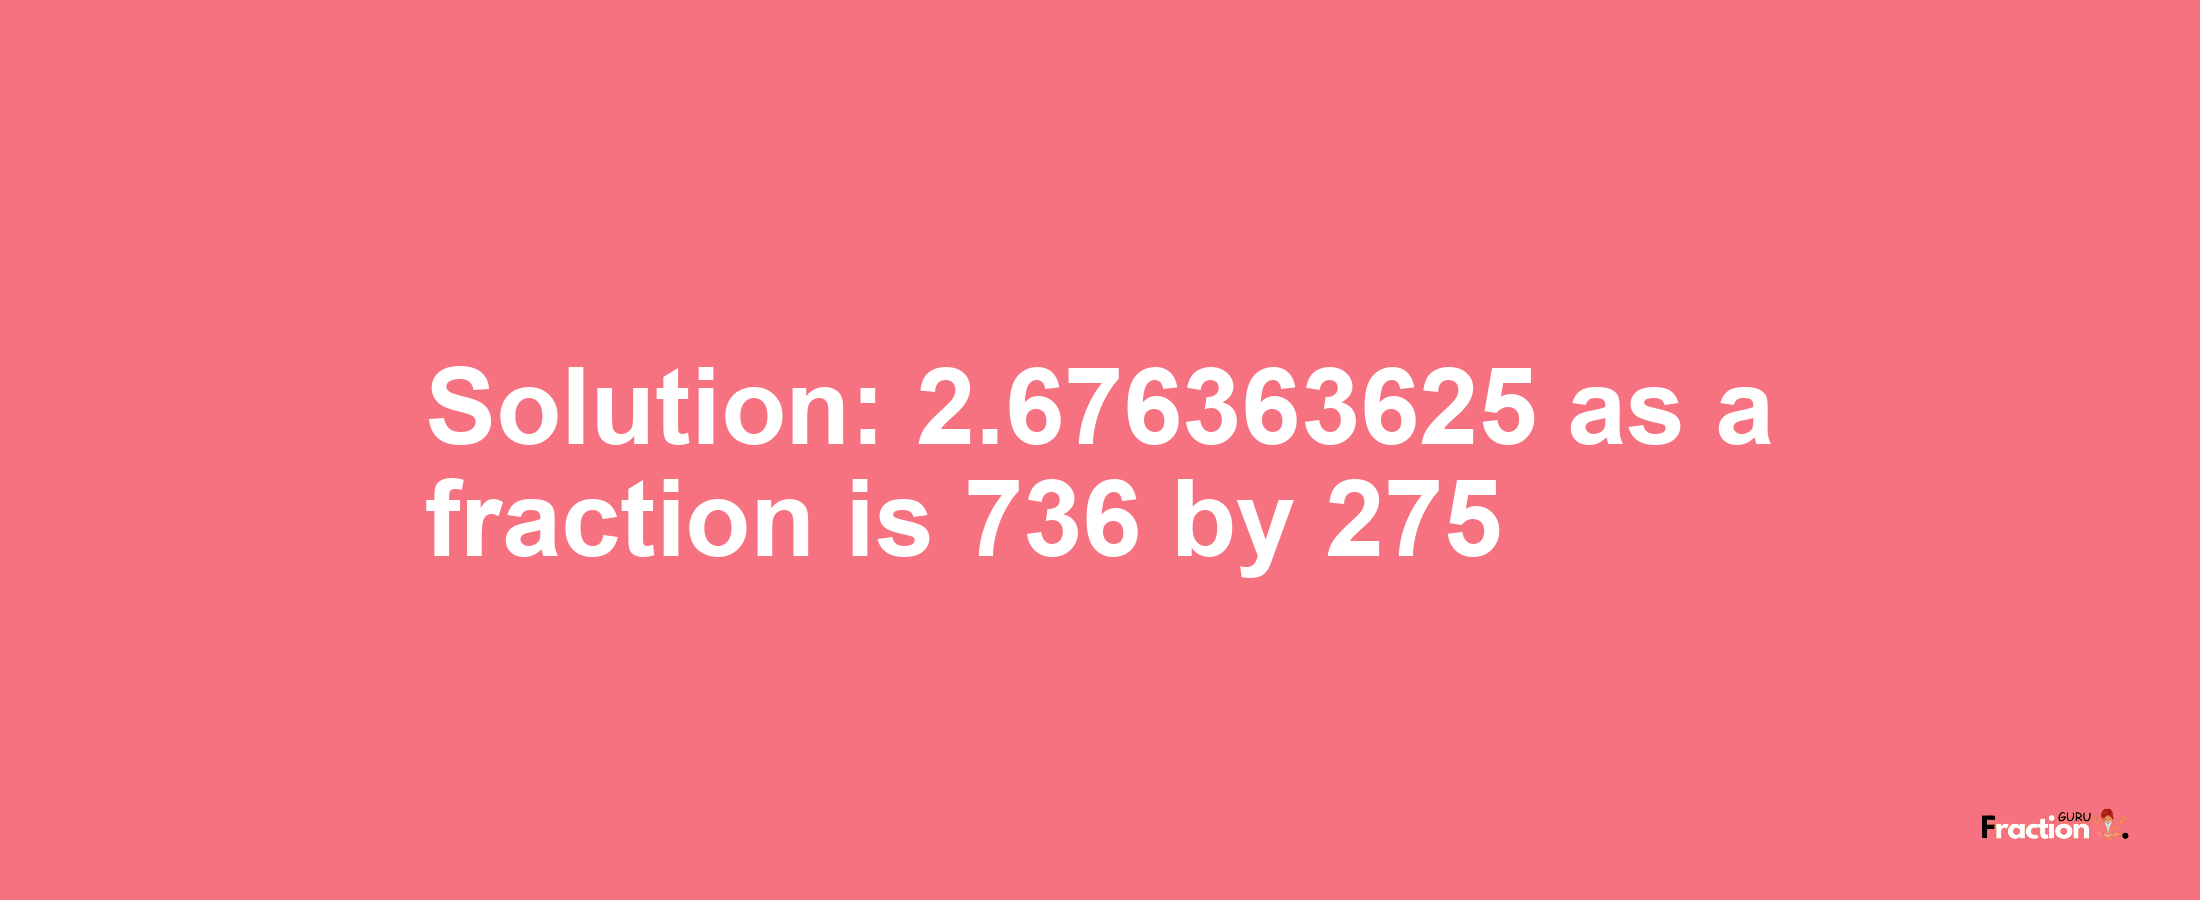 Solution:2.676363625 as a fraction is 736/275